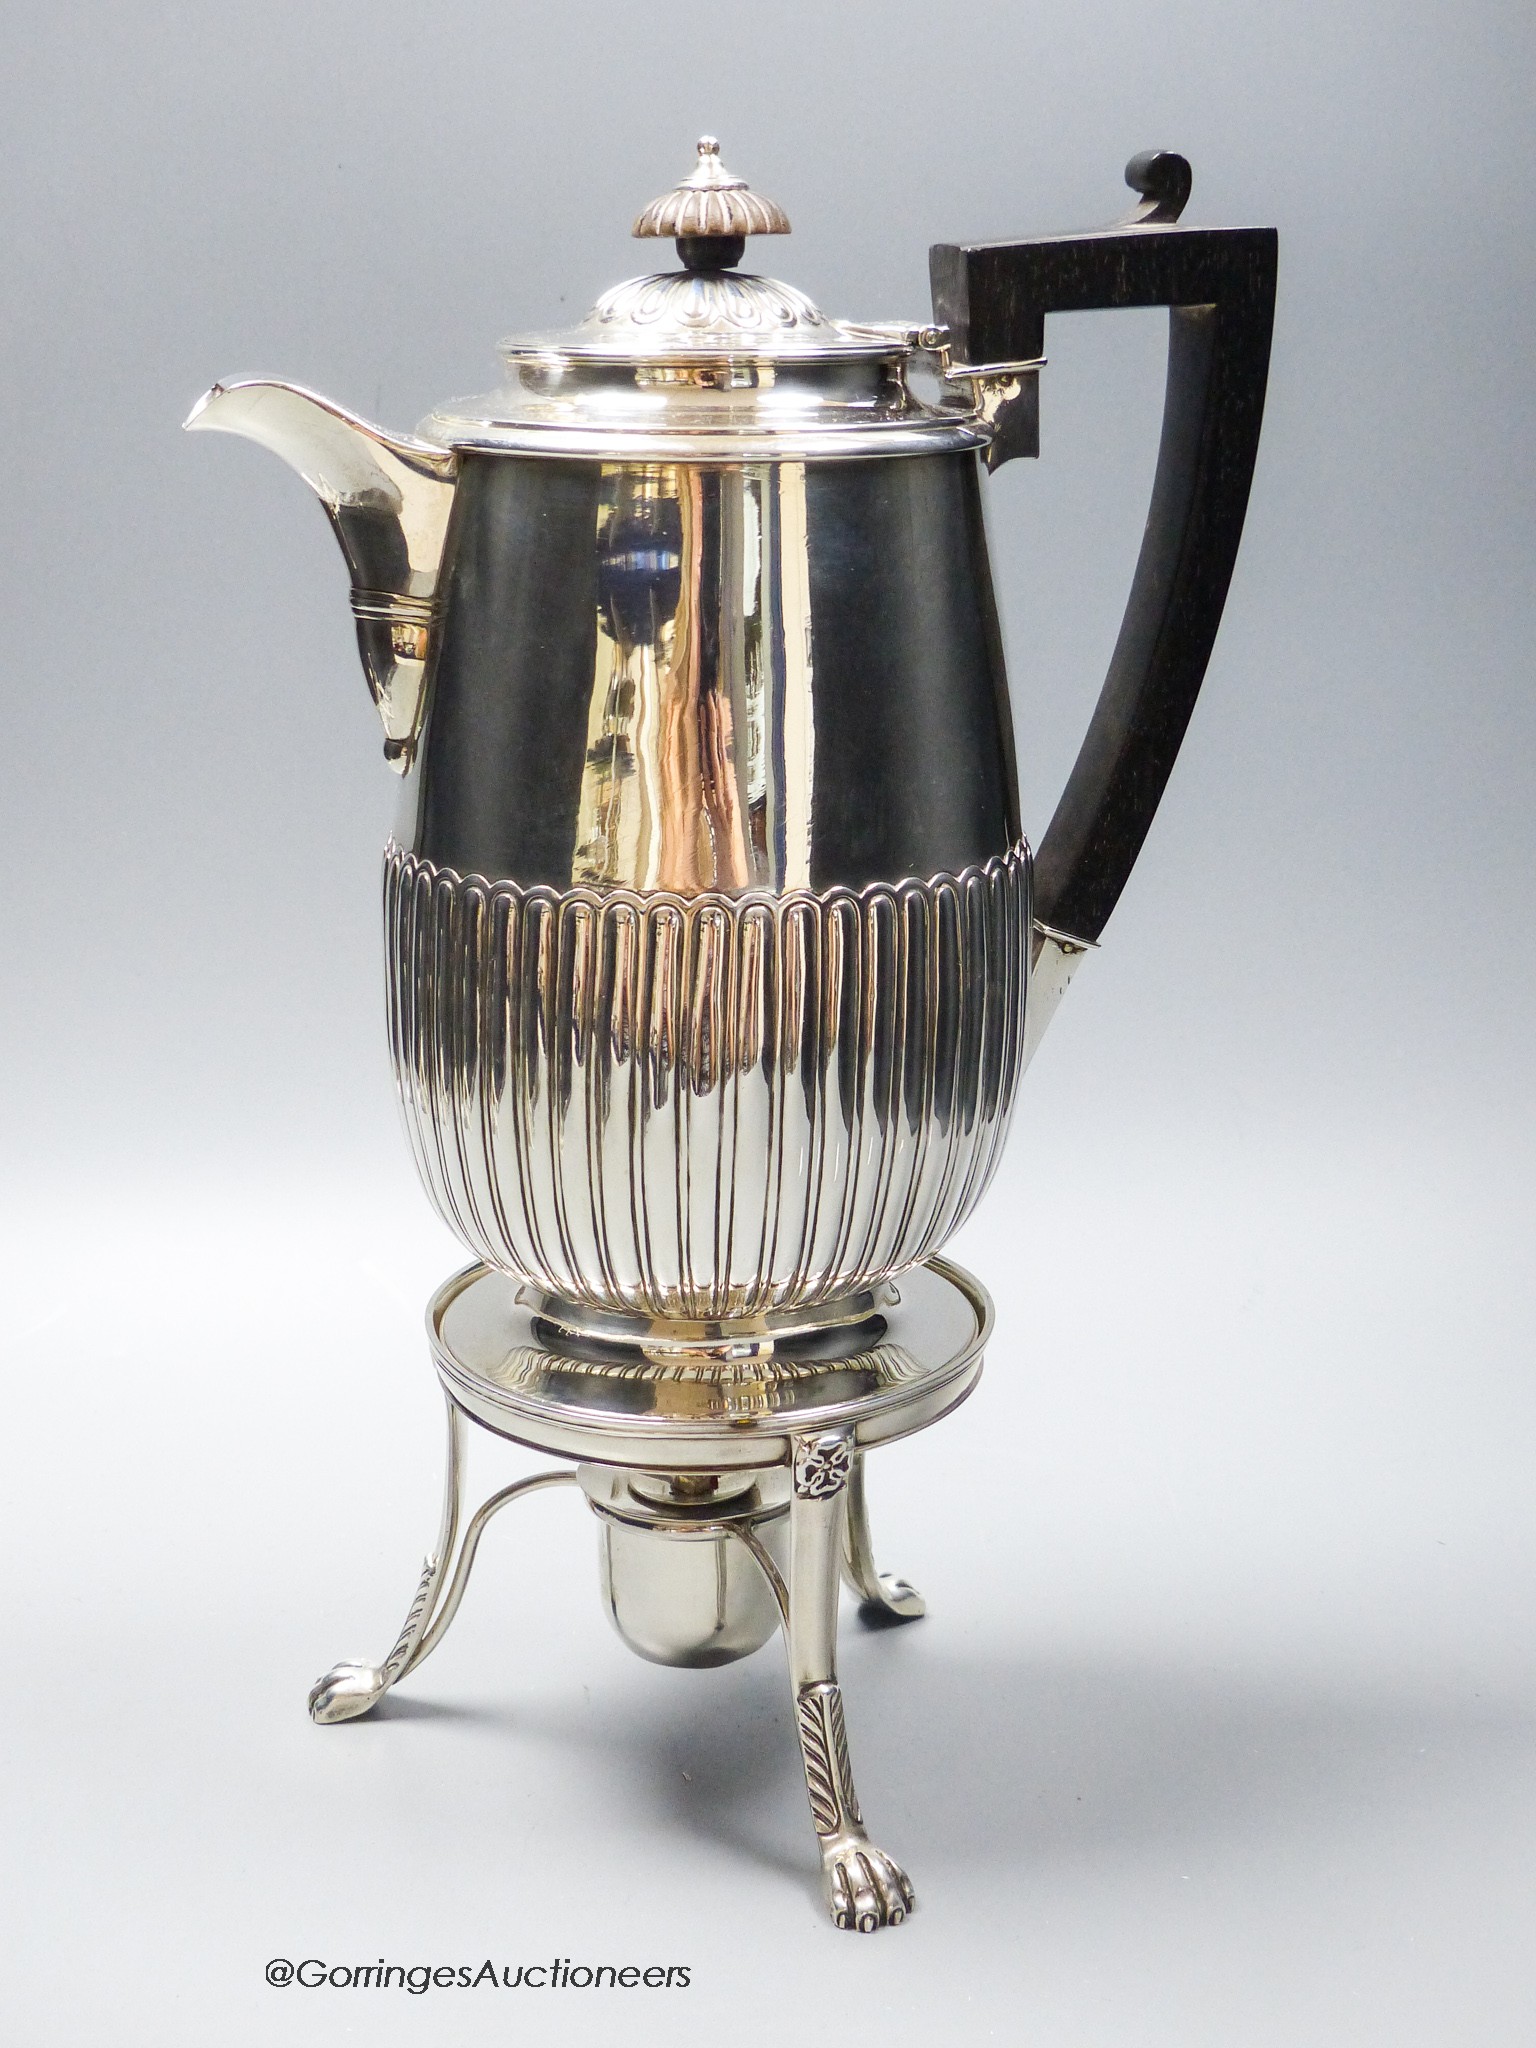 A George III demi fluted silver biggin pot, Burwash & Sibley, London, 1810, on a later matches stand with burner, stand marked for William Bennett, London, 1814, overall 32cm, gross 34.5oz.                               